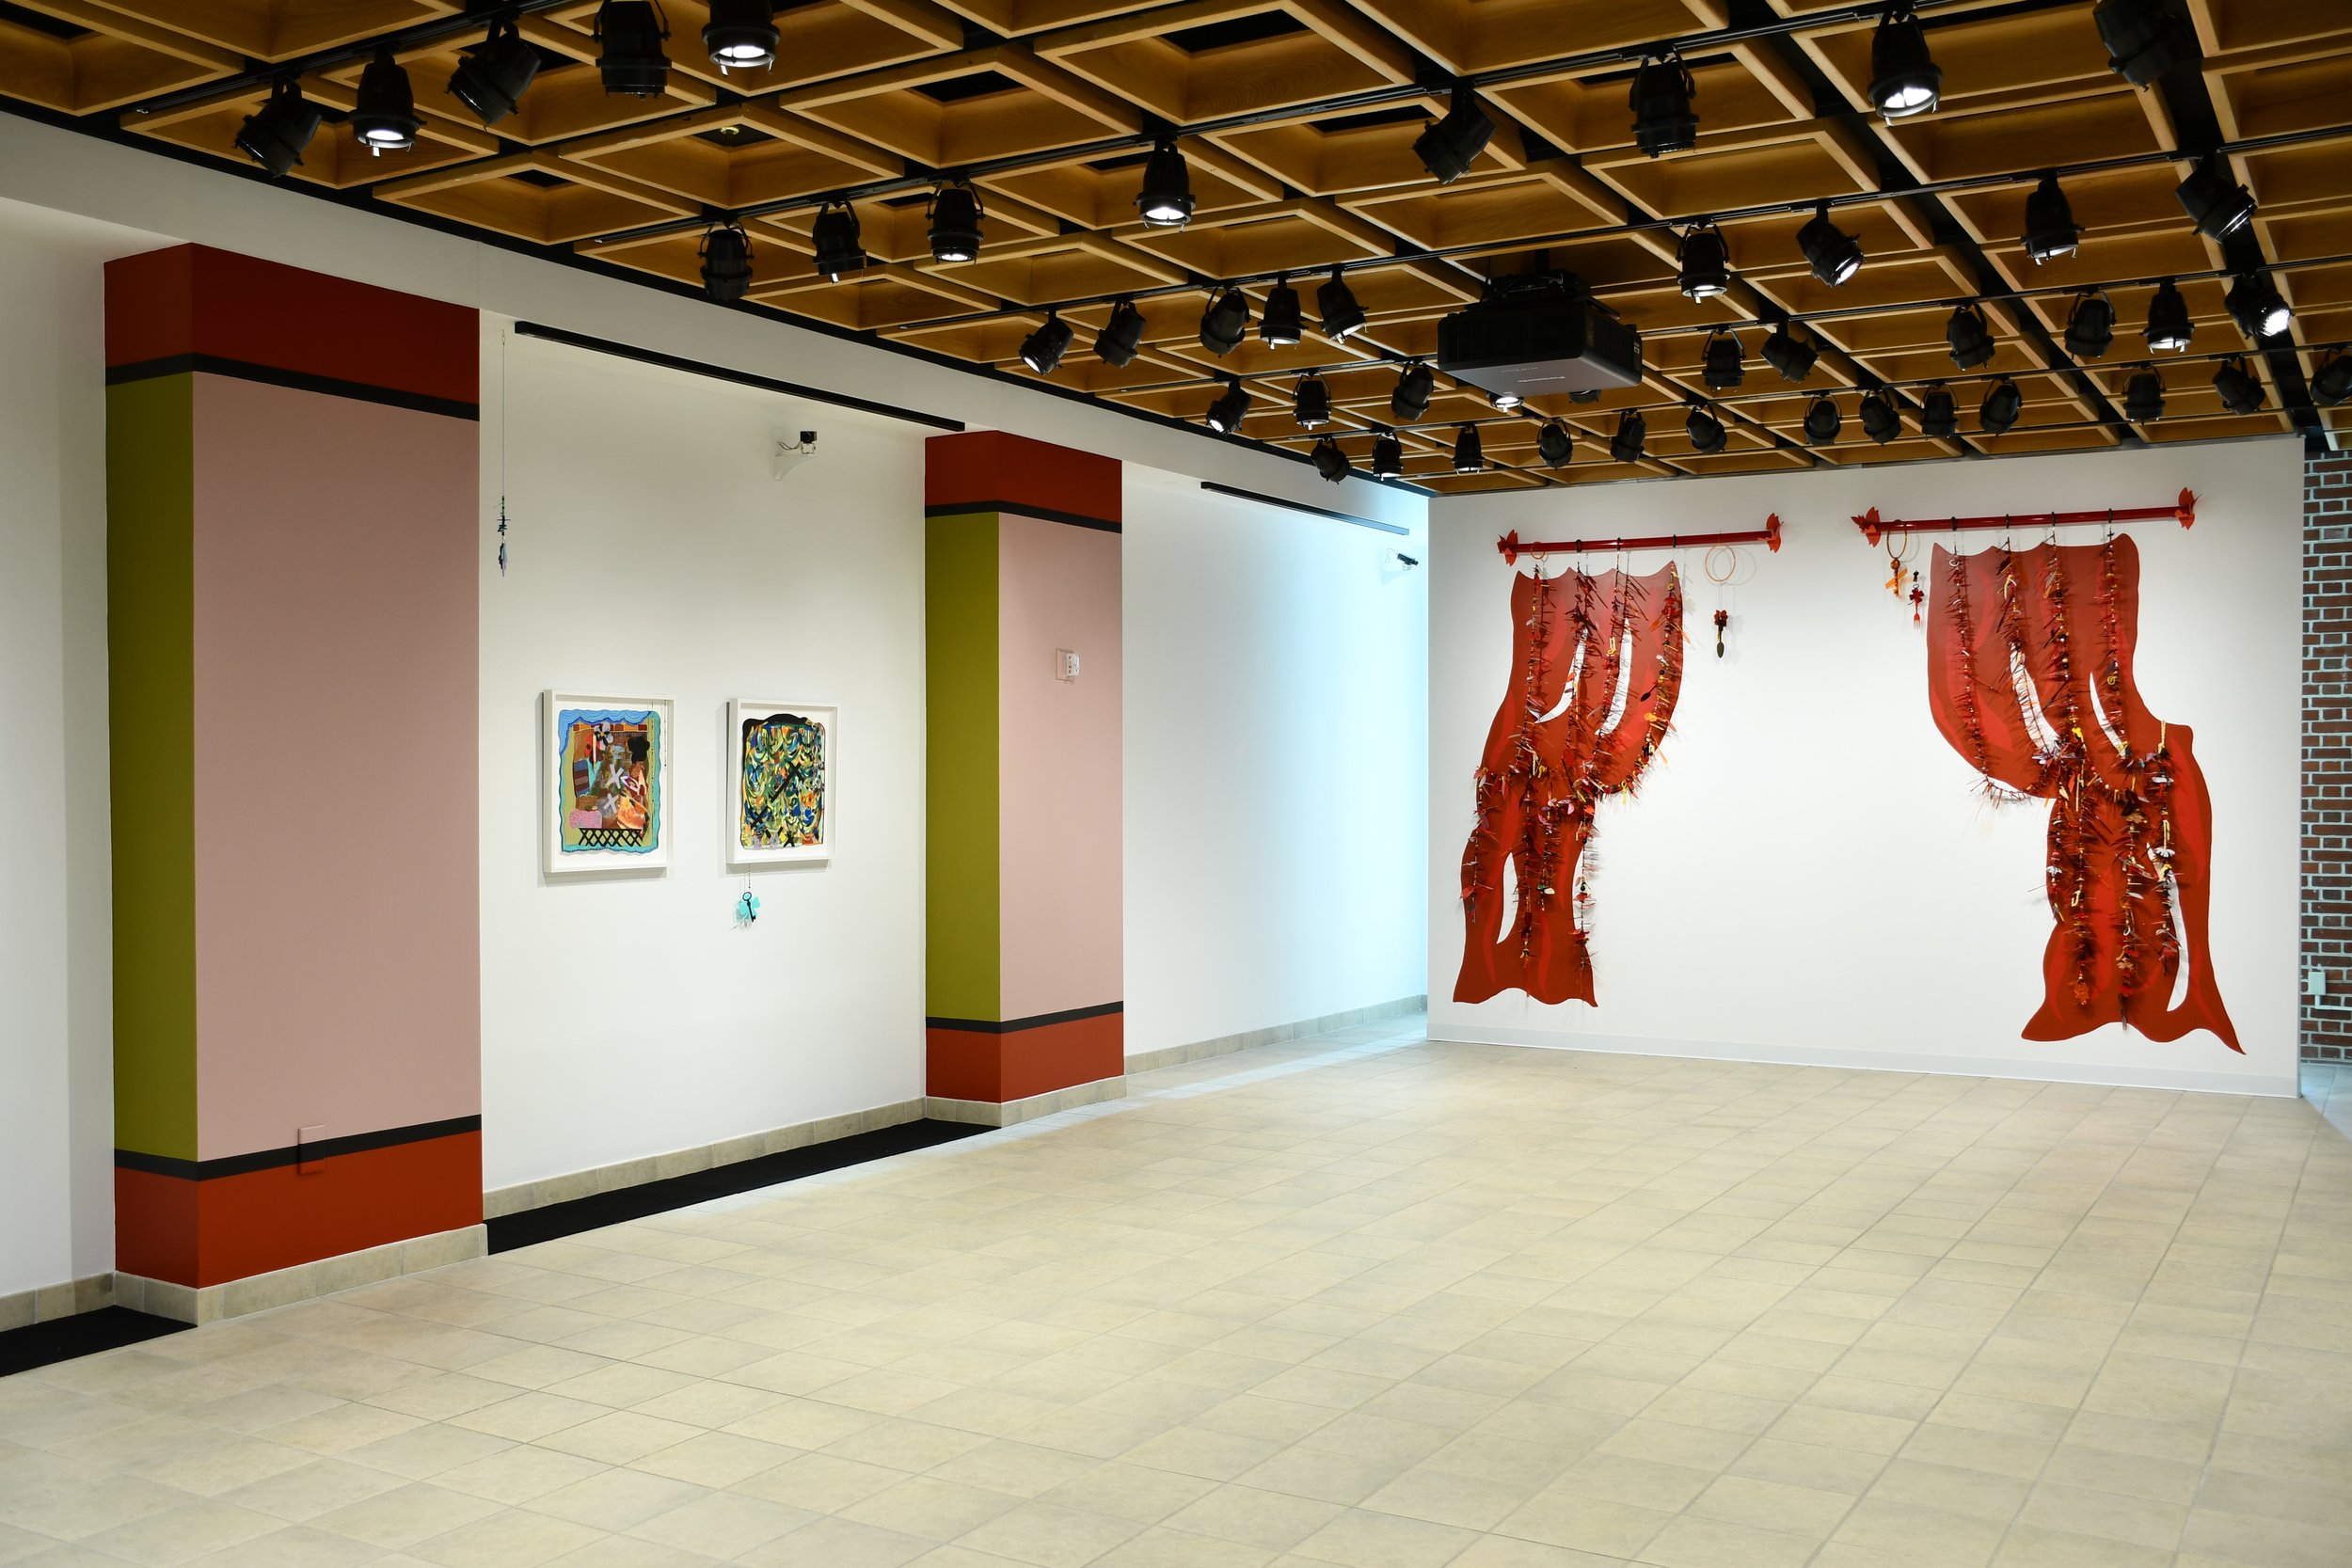 Exhibition View, "Access Excess"